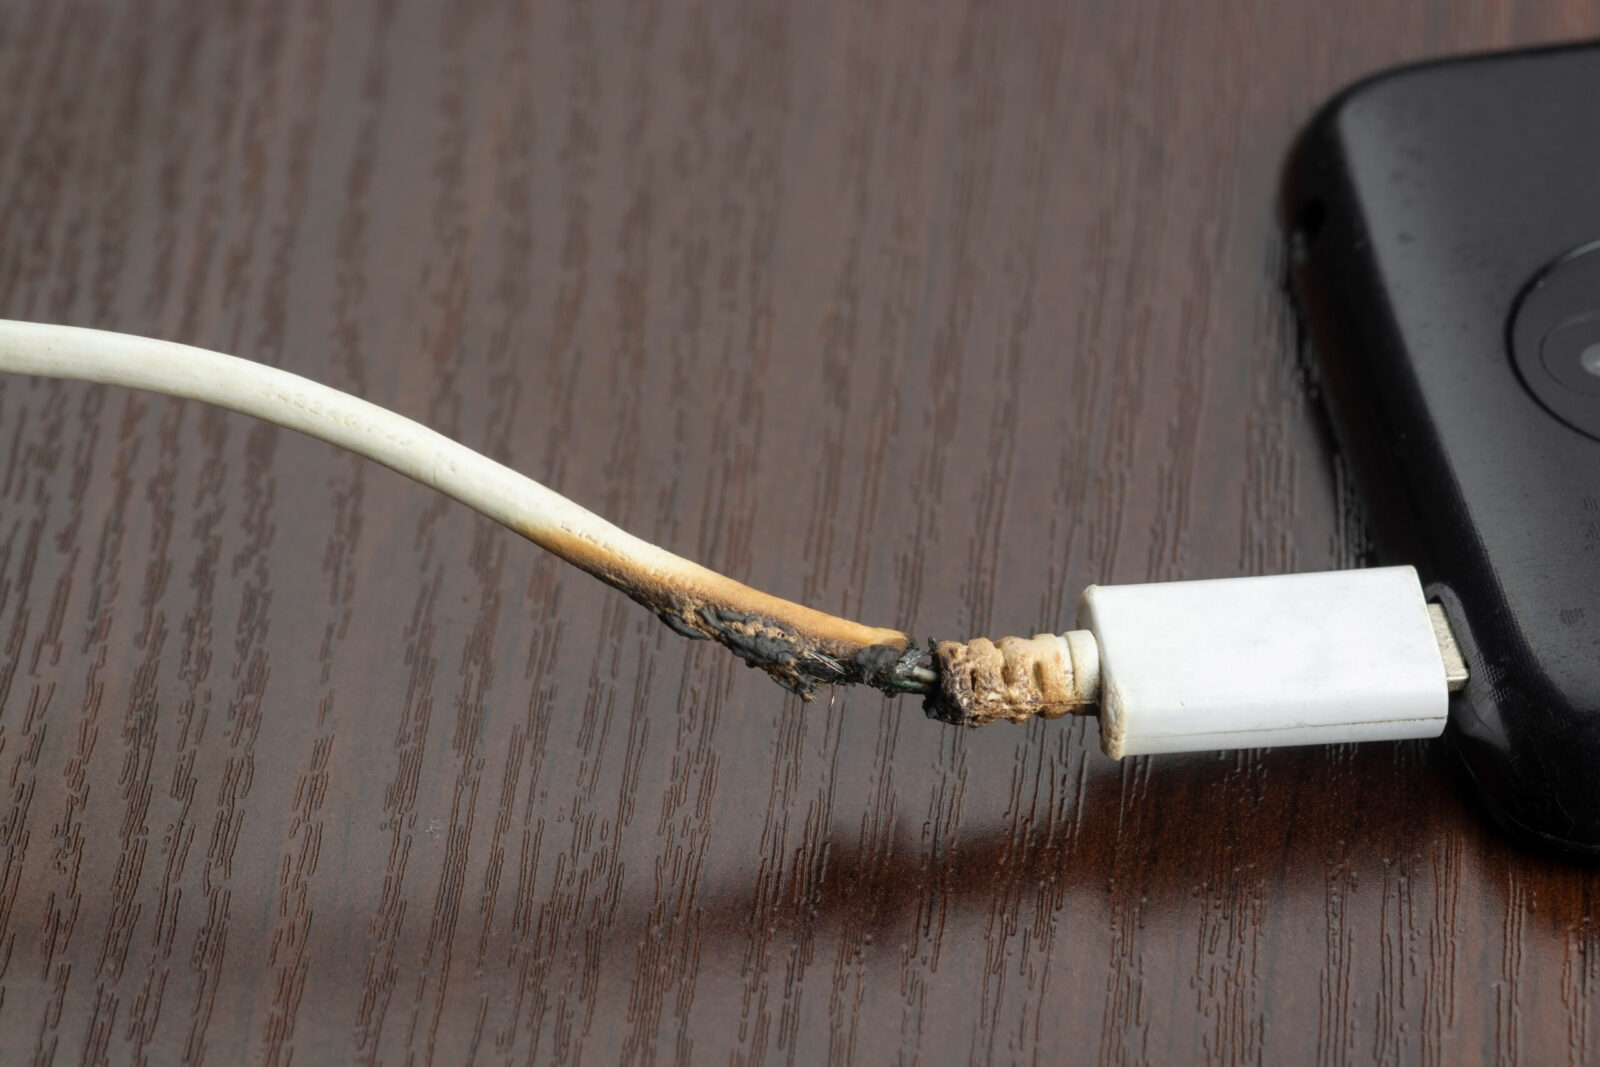 a burned charging cord attached to a cell phone